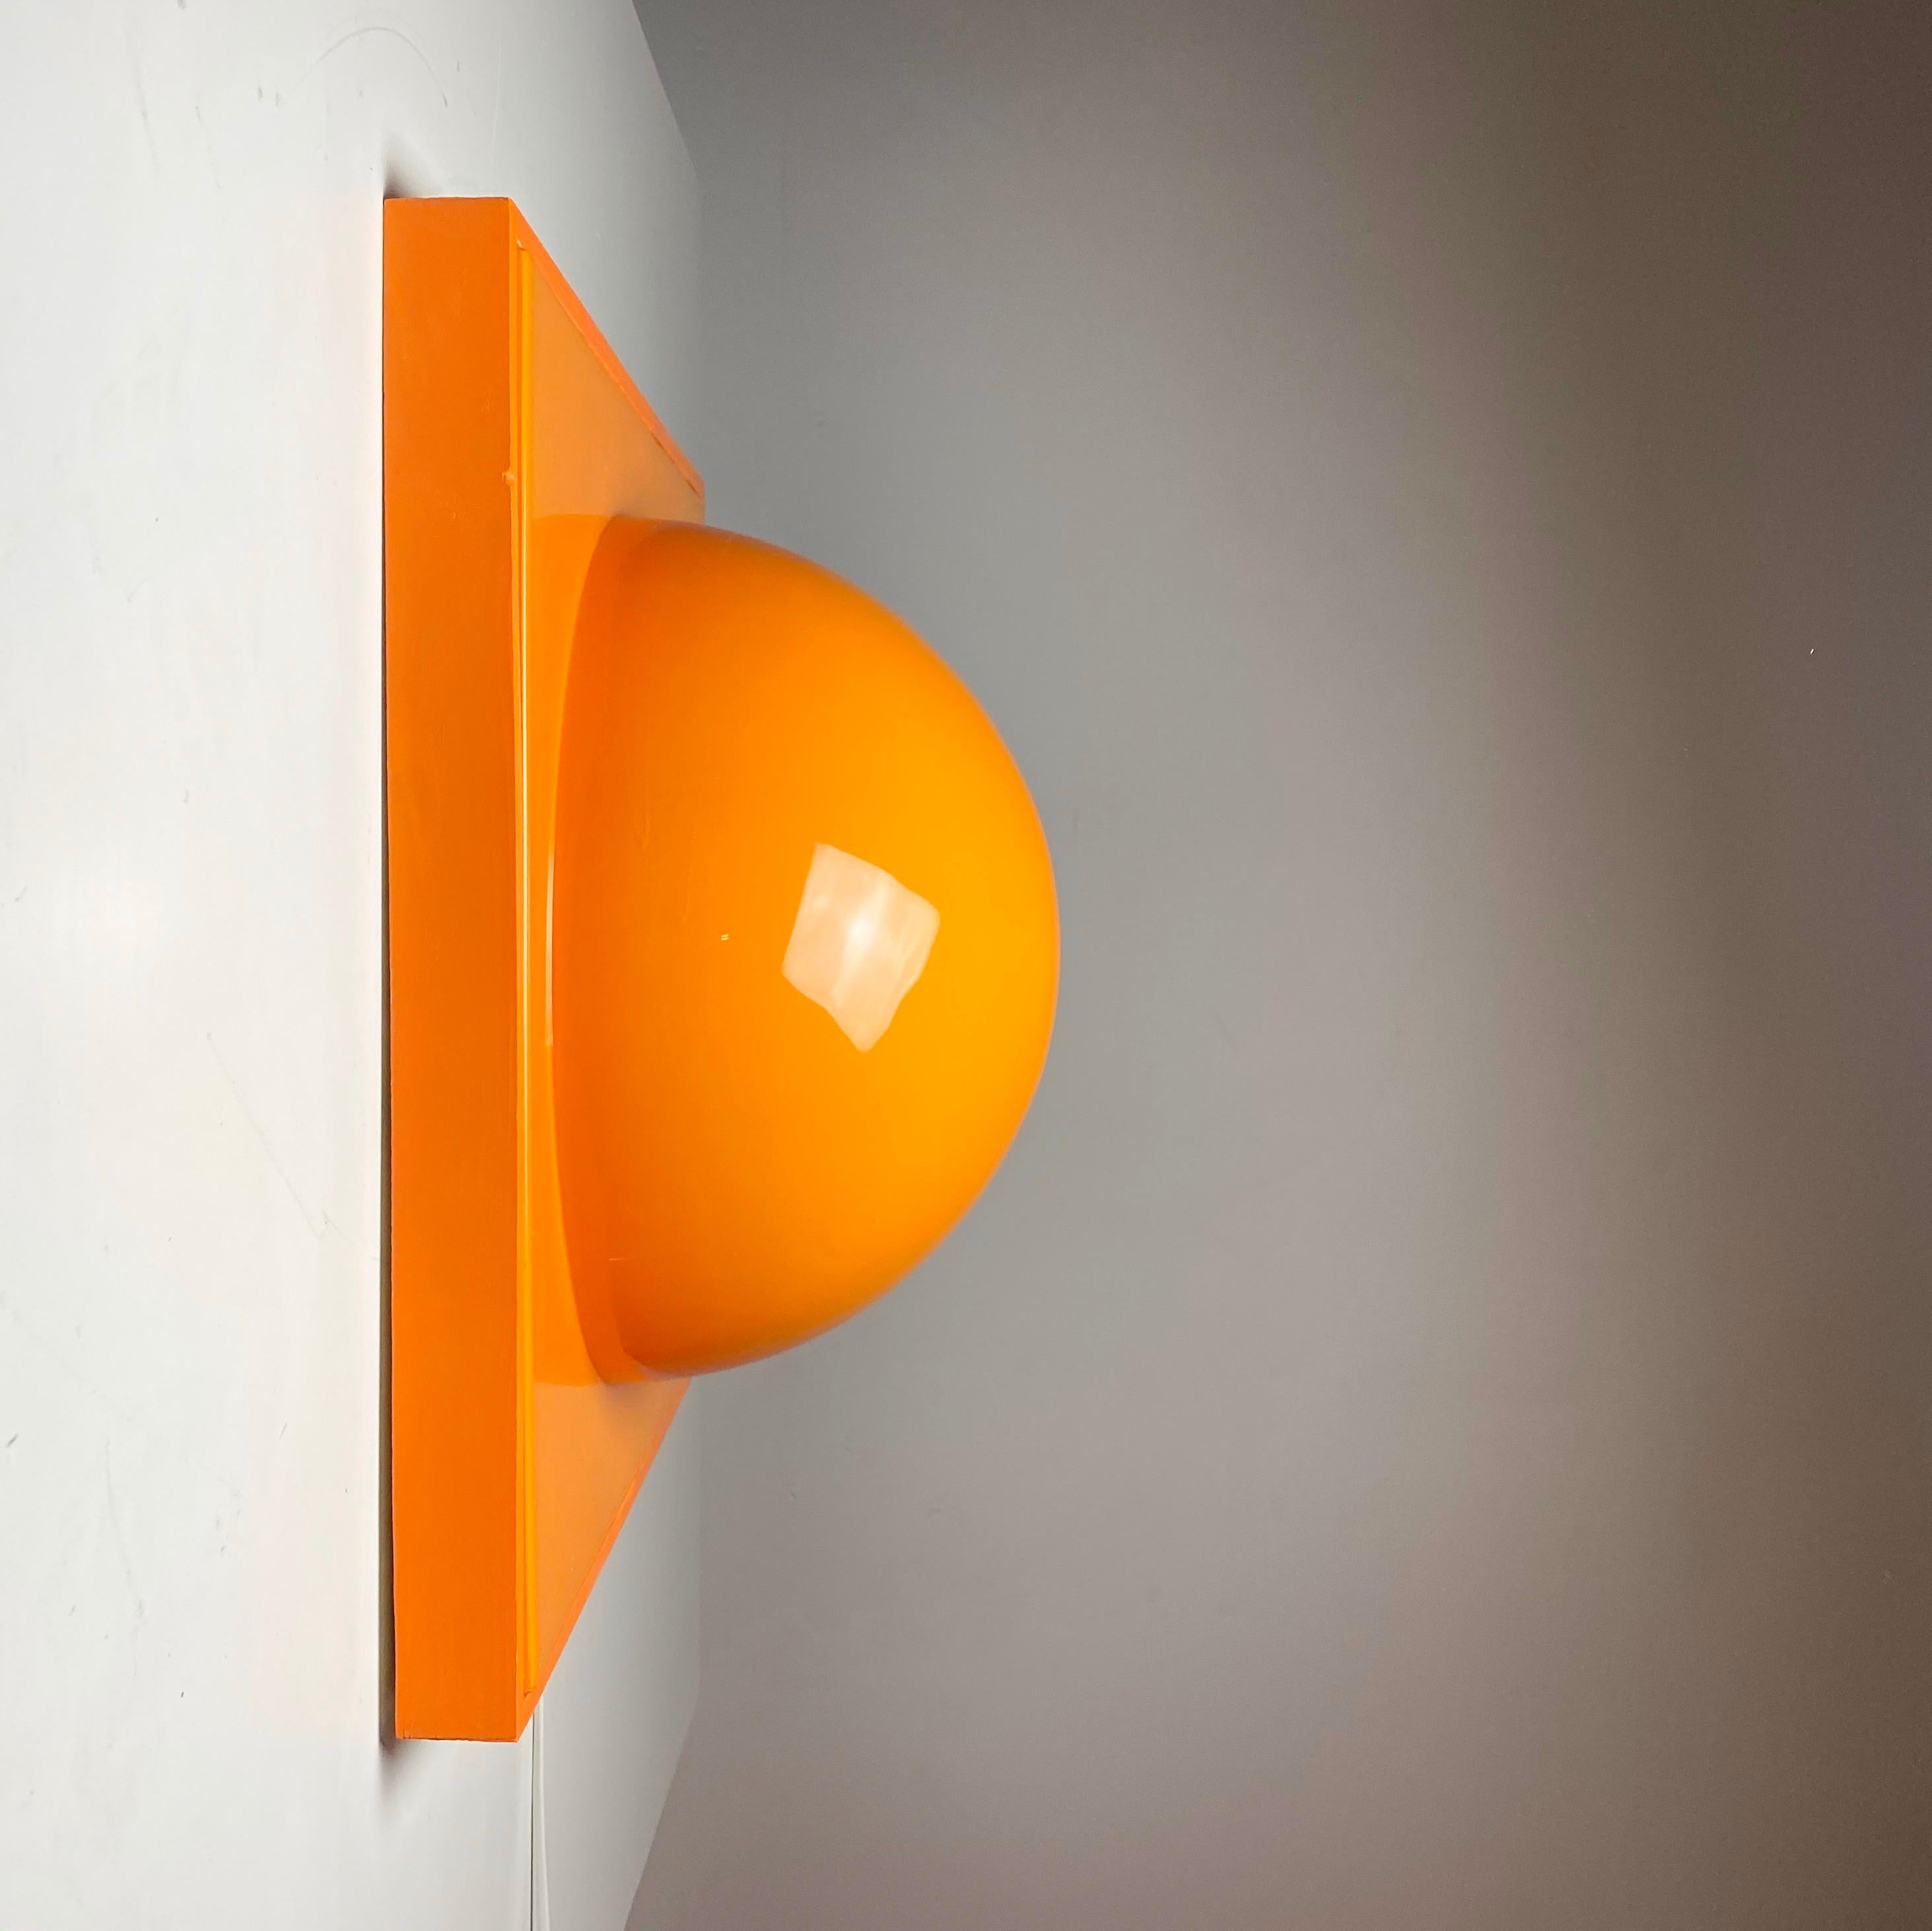 Sculptural designed wall light made in the 1990s and handmade fabricated wooden frame. The mold used is the same as Verner Panton used to produce his wall panels for the design exhibition Visiona 2 in 1970.

Made from orange plastic and wooden